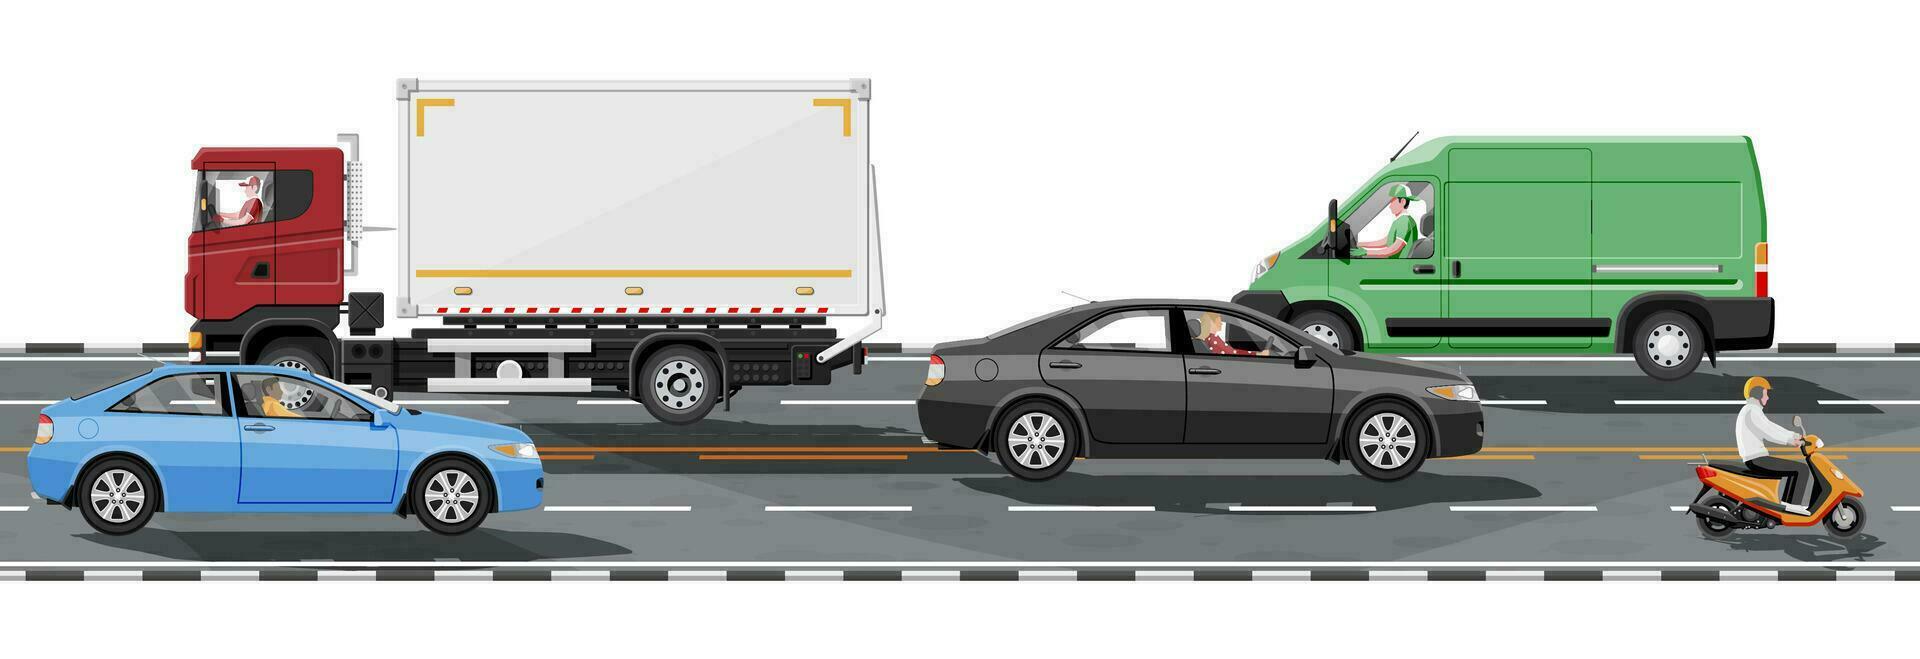 Collection Of Various Vehicles On Road. Sedan, Van, Truck And Motorbike. Car For Transportation, Cargo Services. City Or Urban Transport. Highway Side View. Vector Illustration In Flat Style